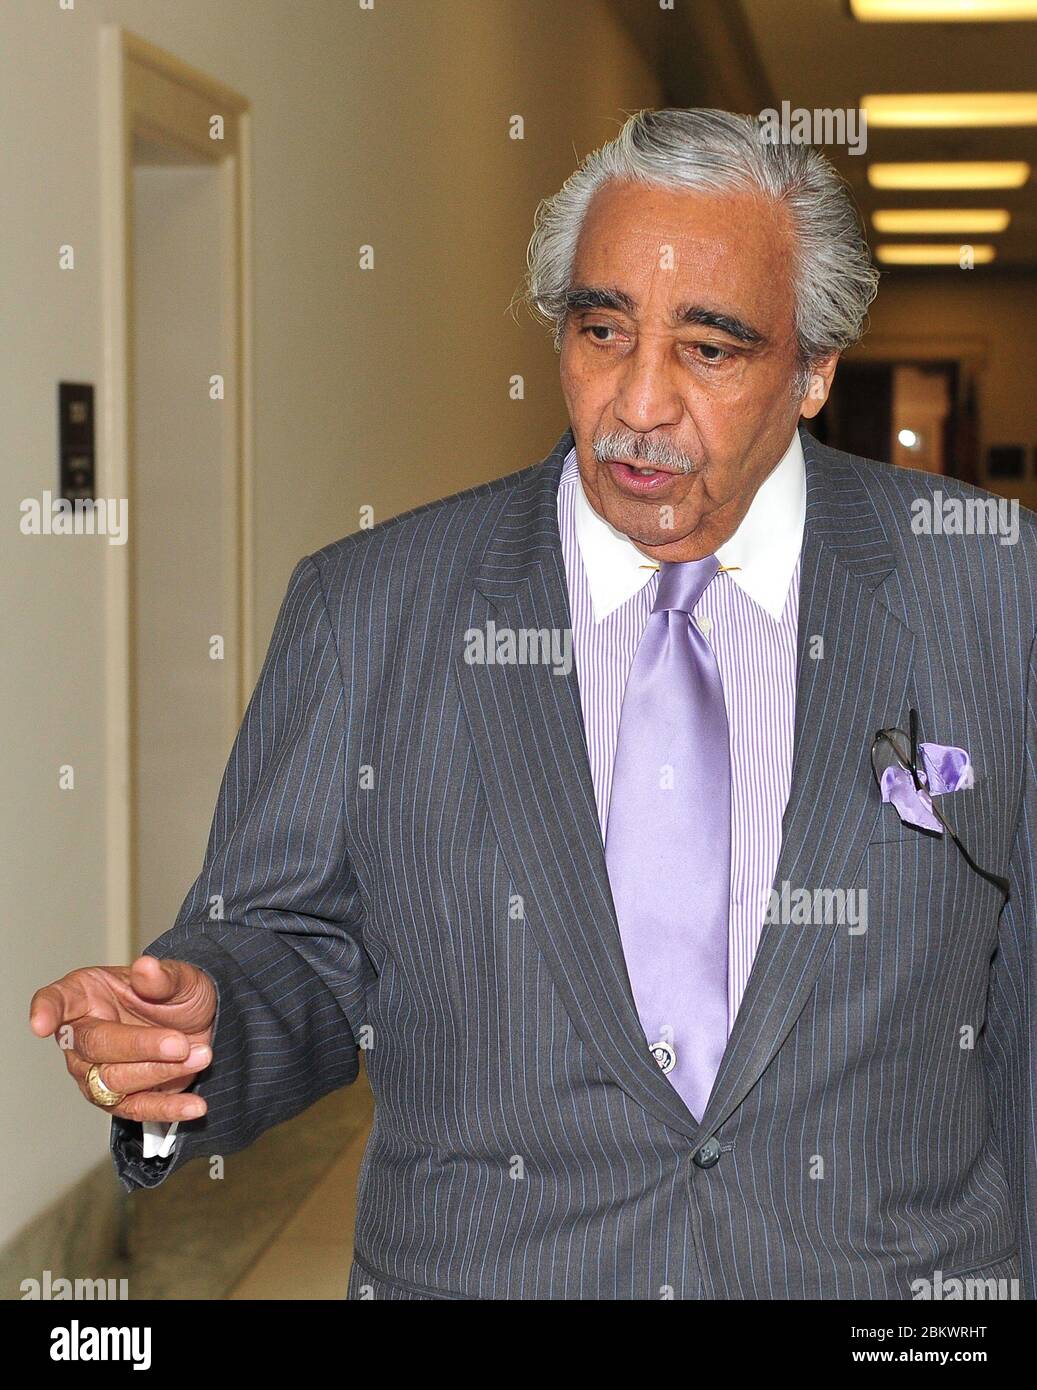 United States Representative Charlie Rangel (Democrat of New York) departs from his Capitol Hill office on Tuesday, November 30, 2010.Credit: Ron Sachs / CNP  (RESTRICTION: NO New York or New Jersey Newspapers or newspapers within a 75 mile radius of New York City) / MediaPunch Stock Photo